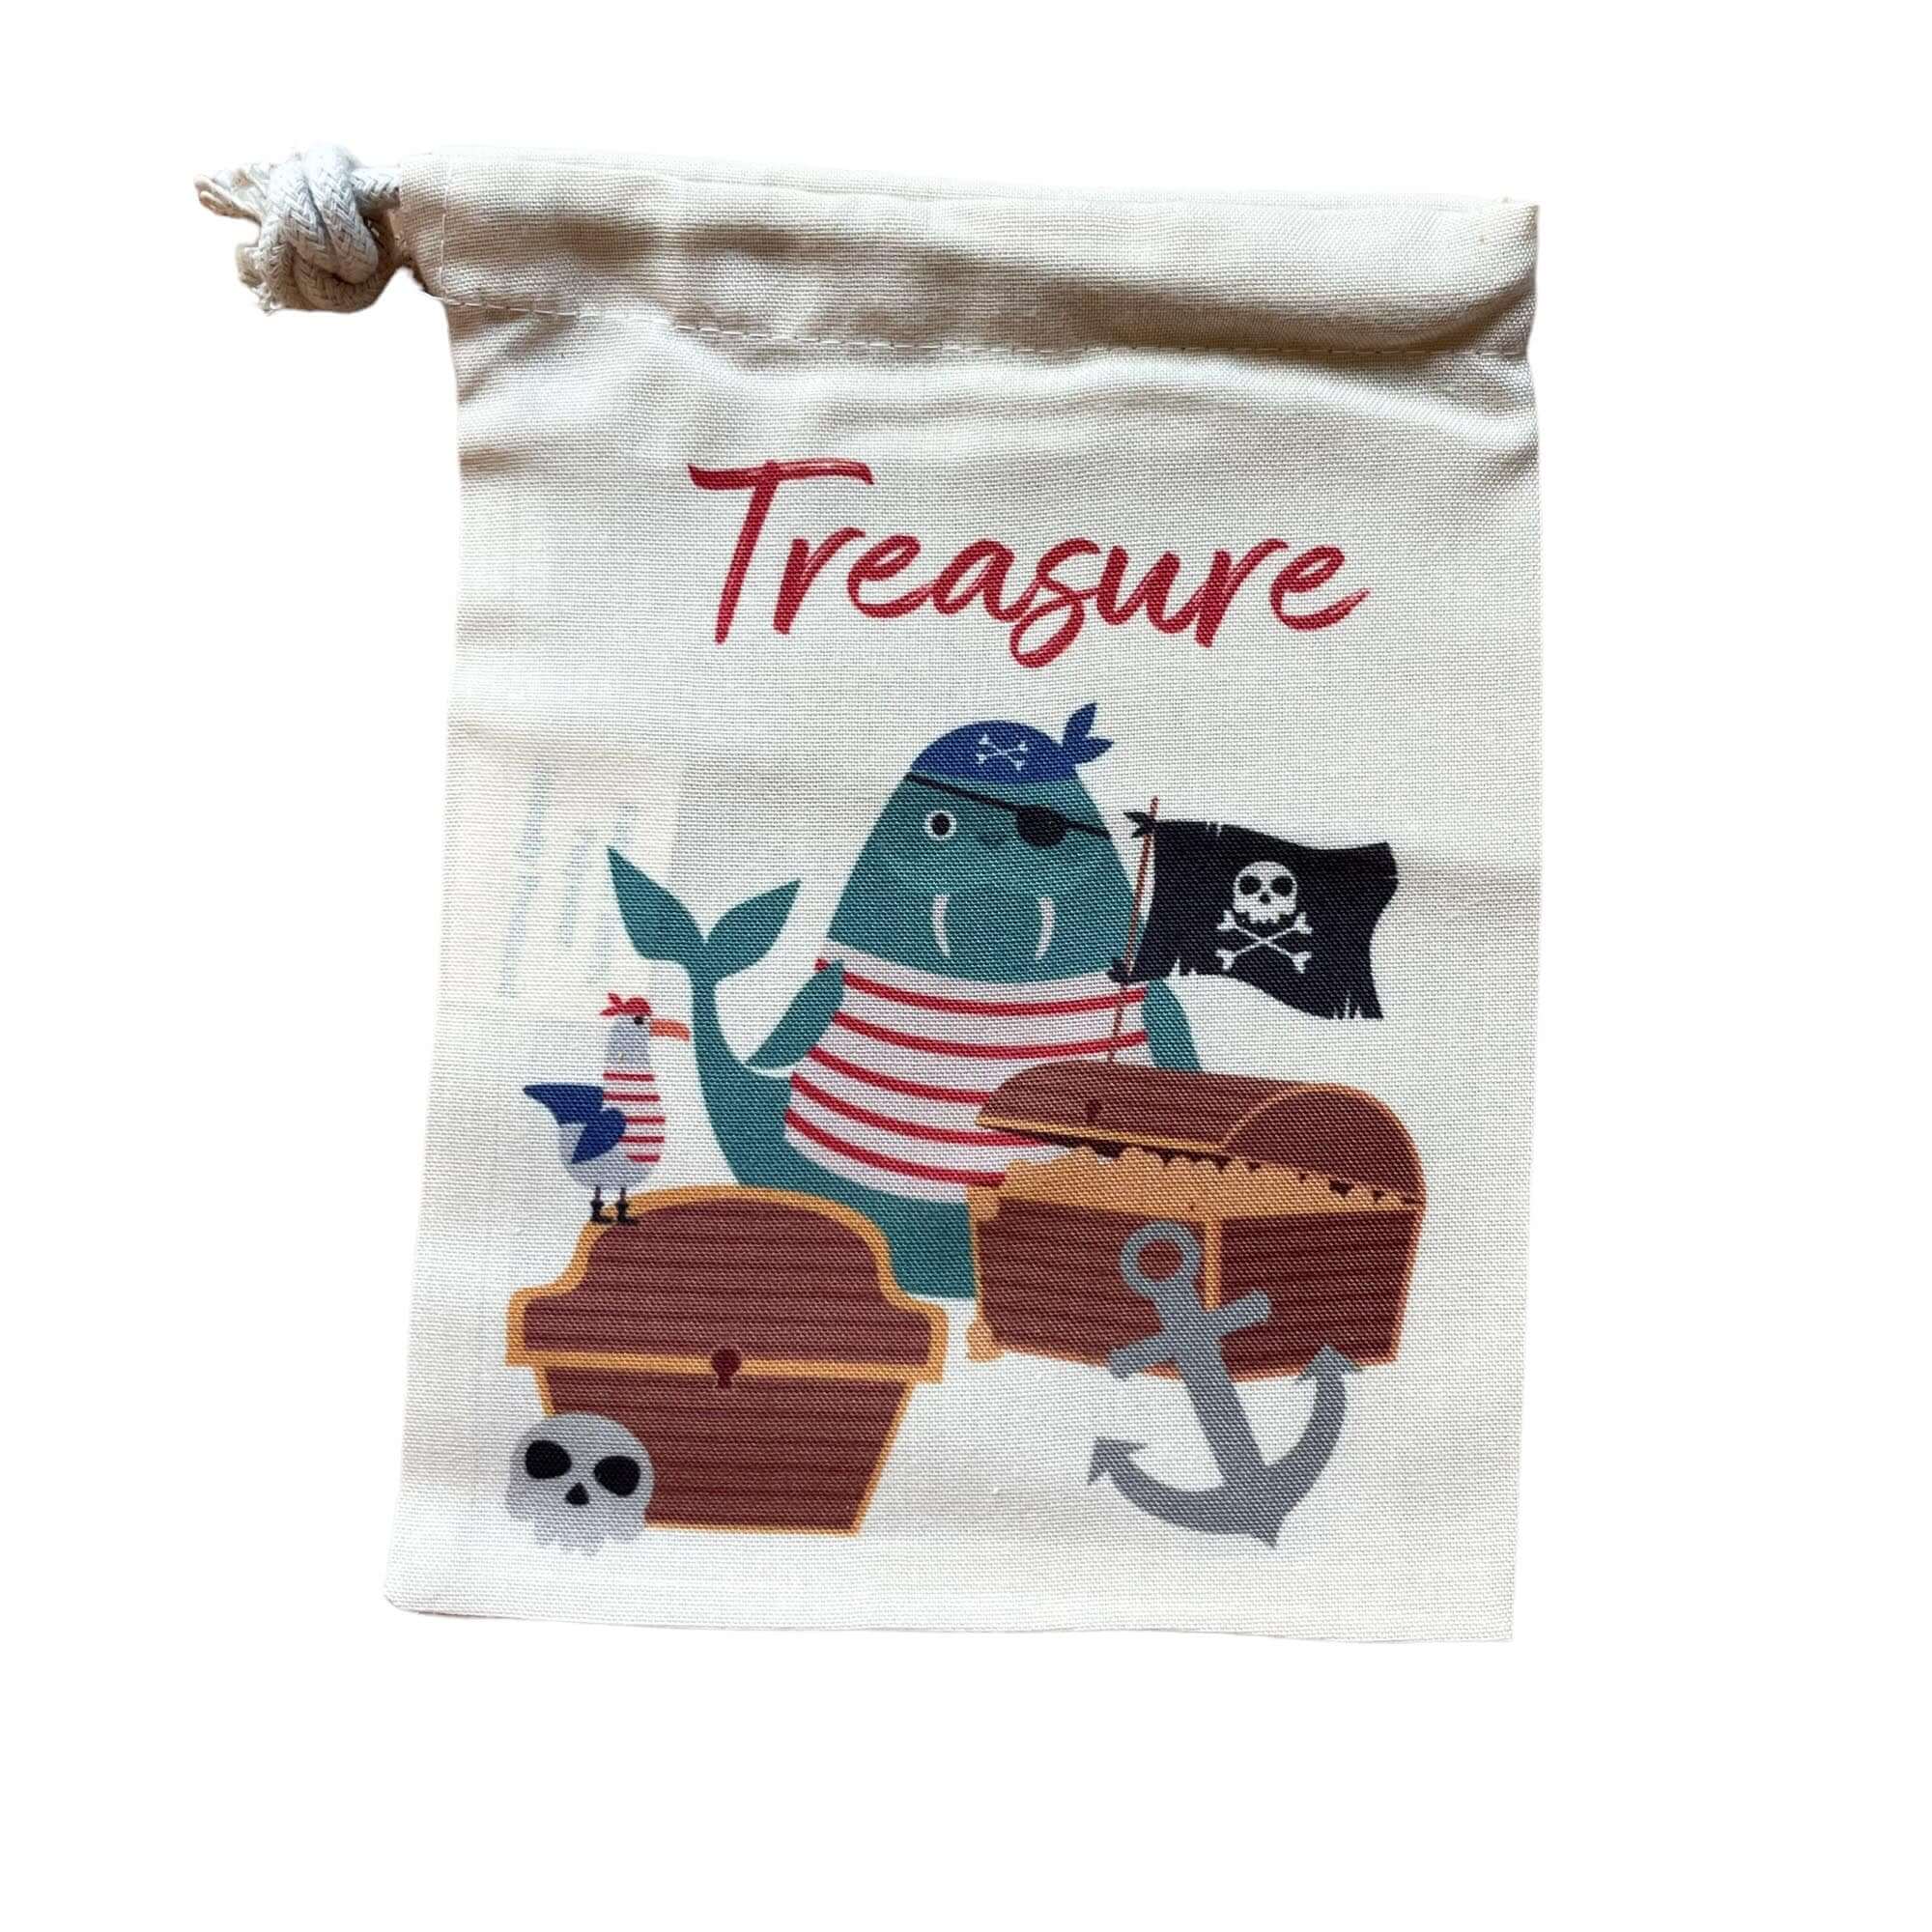 Pirate Time Capsule set from Mustard and Gray. Printed keepsake tin with cards and memorys bag. Time Capsule Gift Set